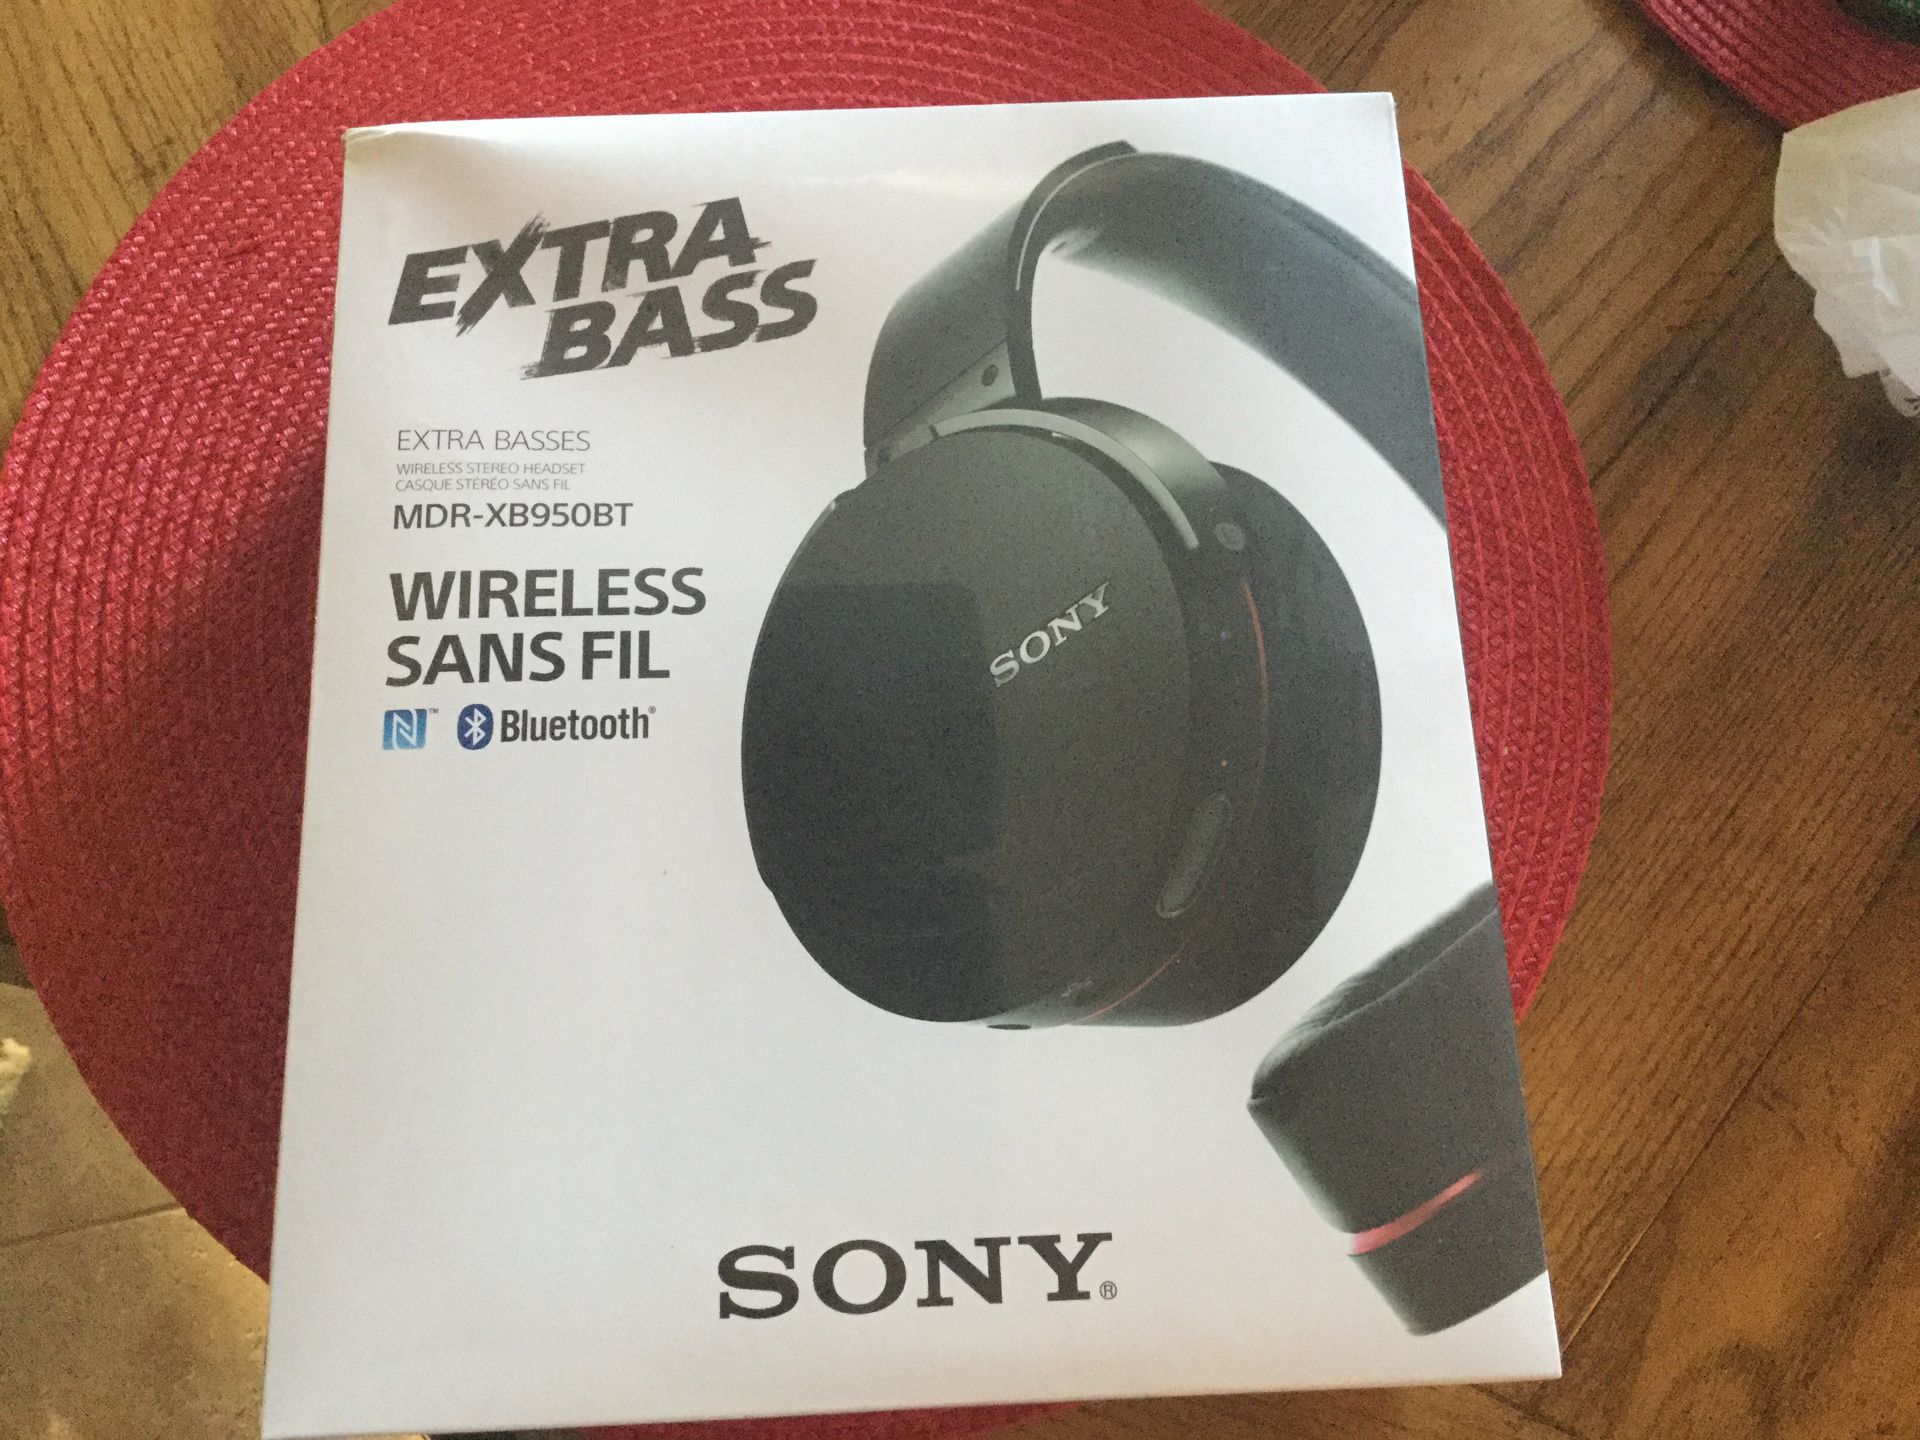 Sony wireless headset with Bluetooth - new in box